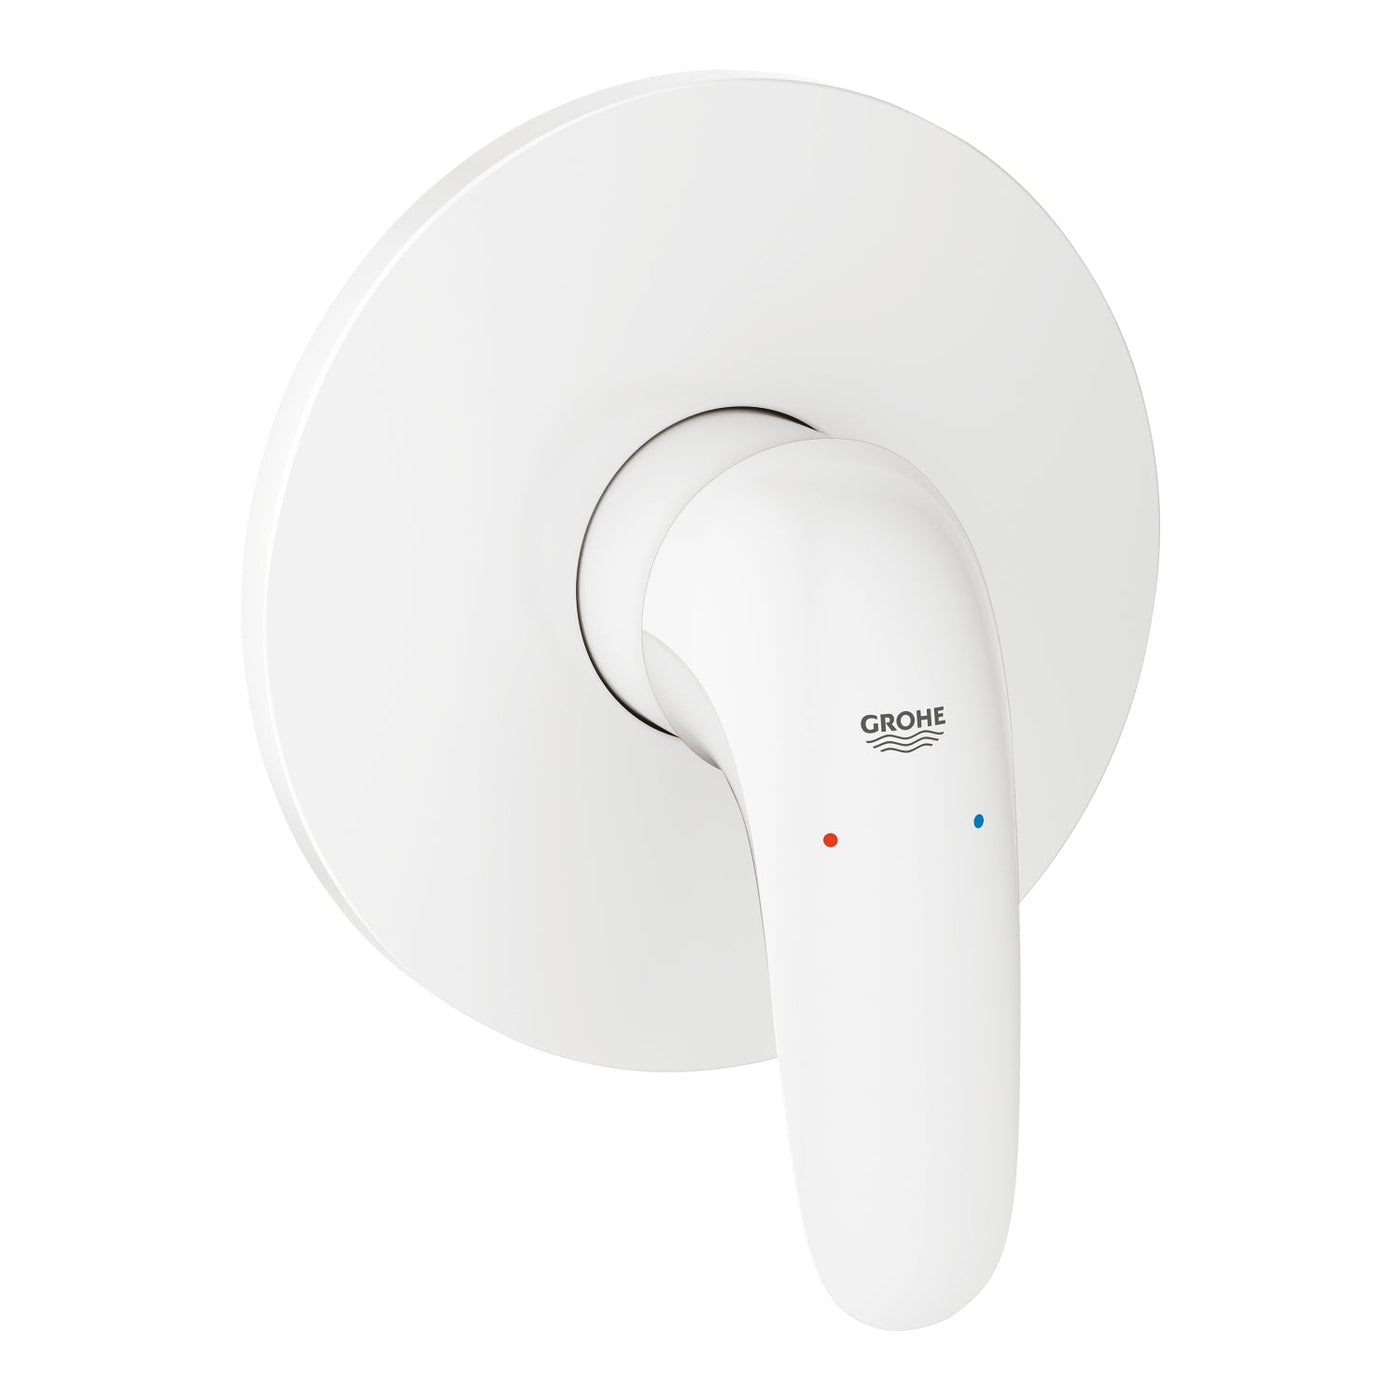 Grohe Moon White Eurostyle Single-lever shower mixer trim - Letta London - Thermostatic Showers